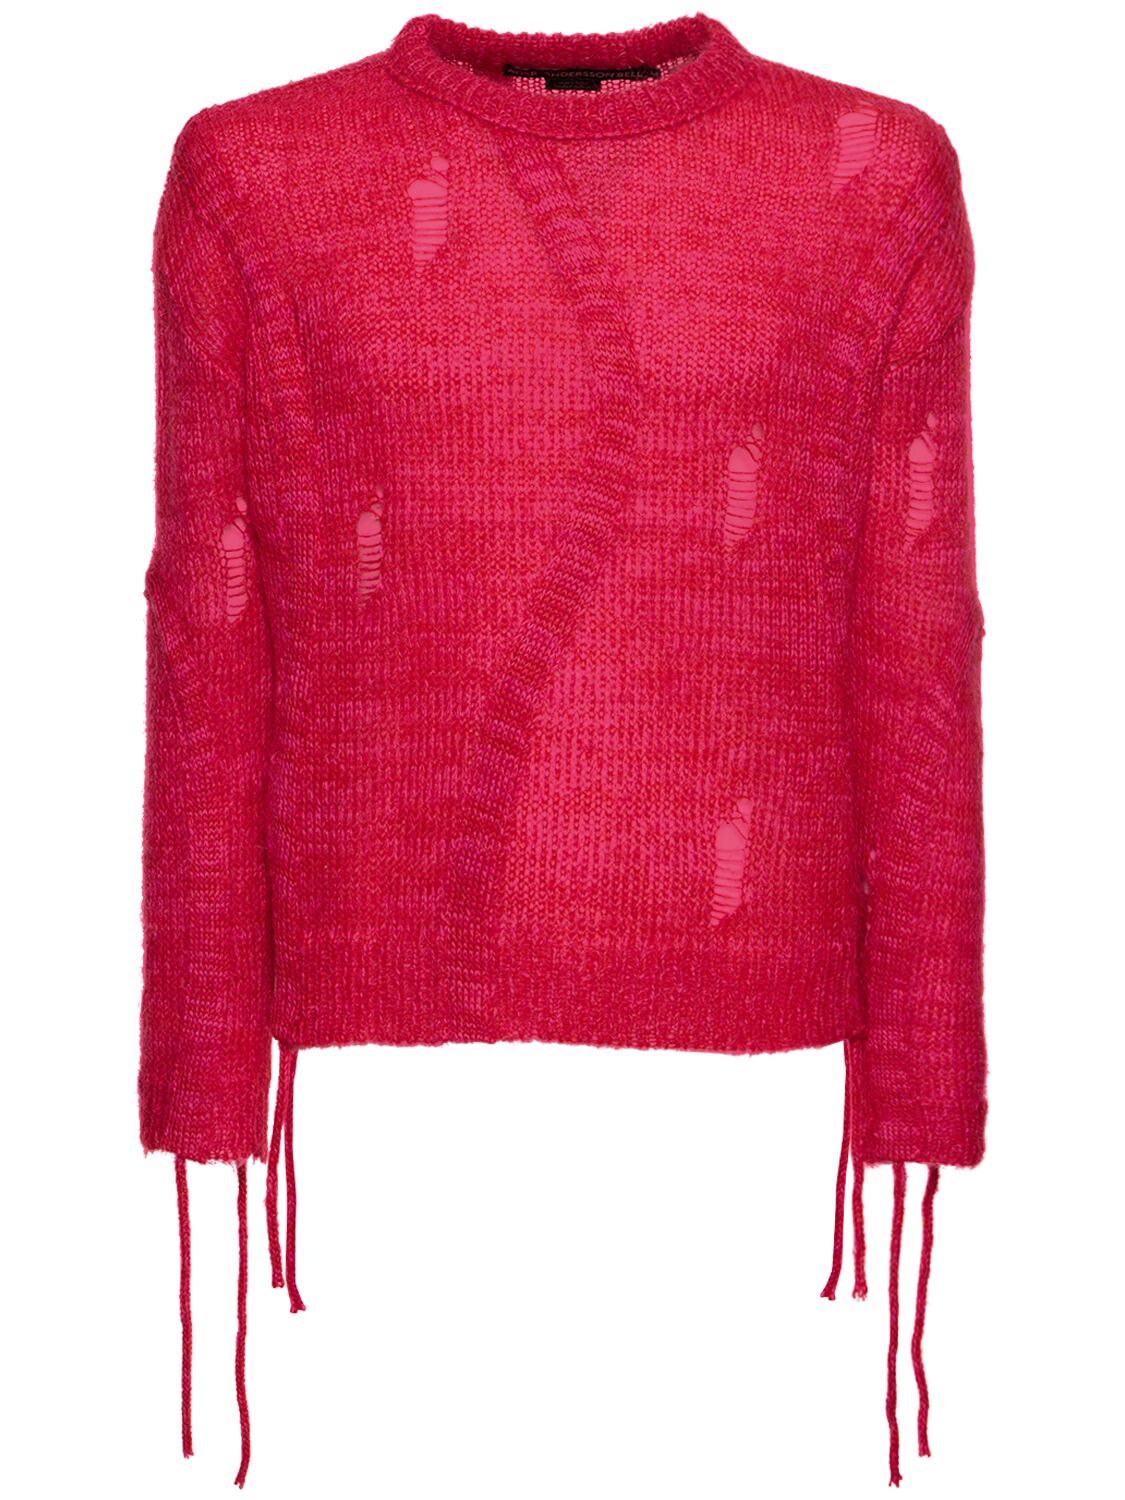 Image of Colbine Mohair Blend Crewneck Sweater